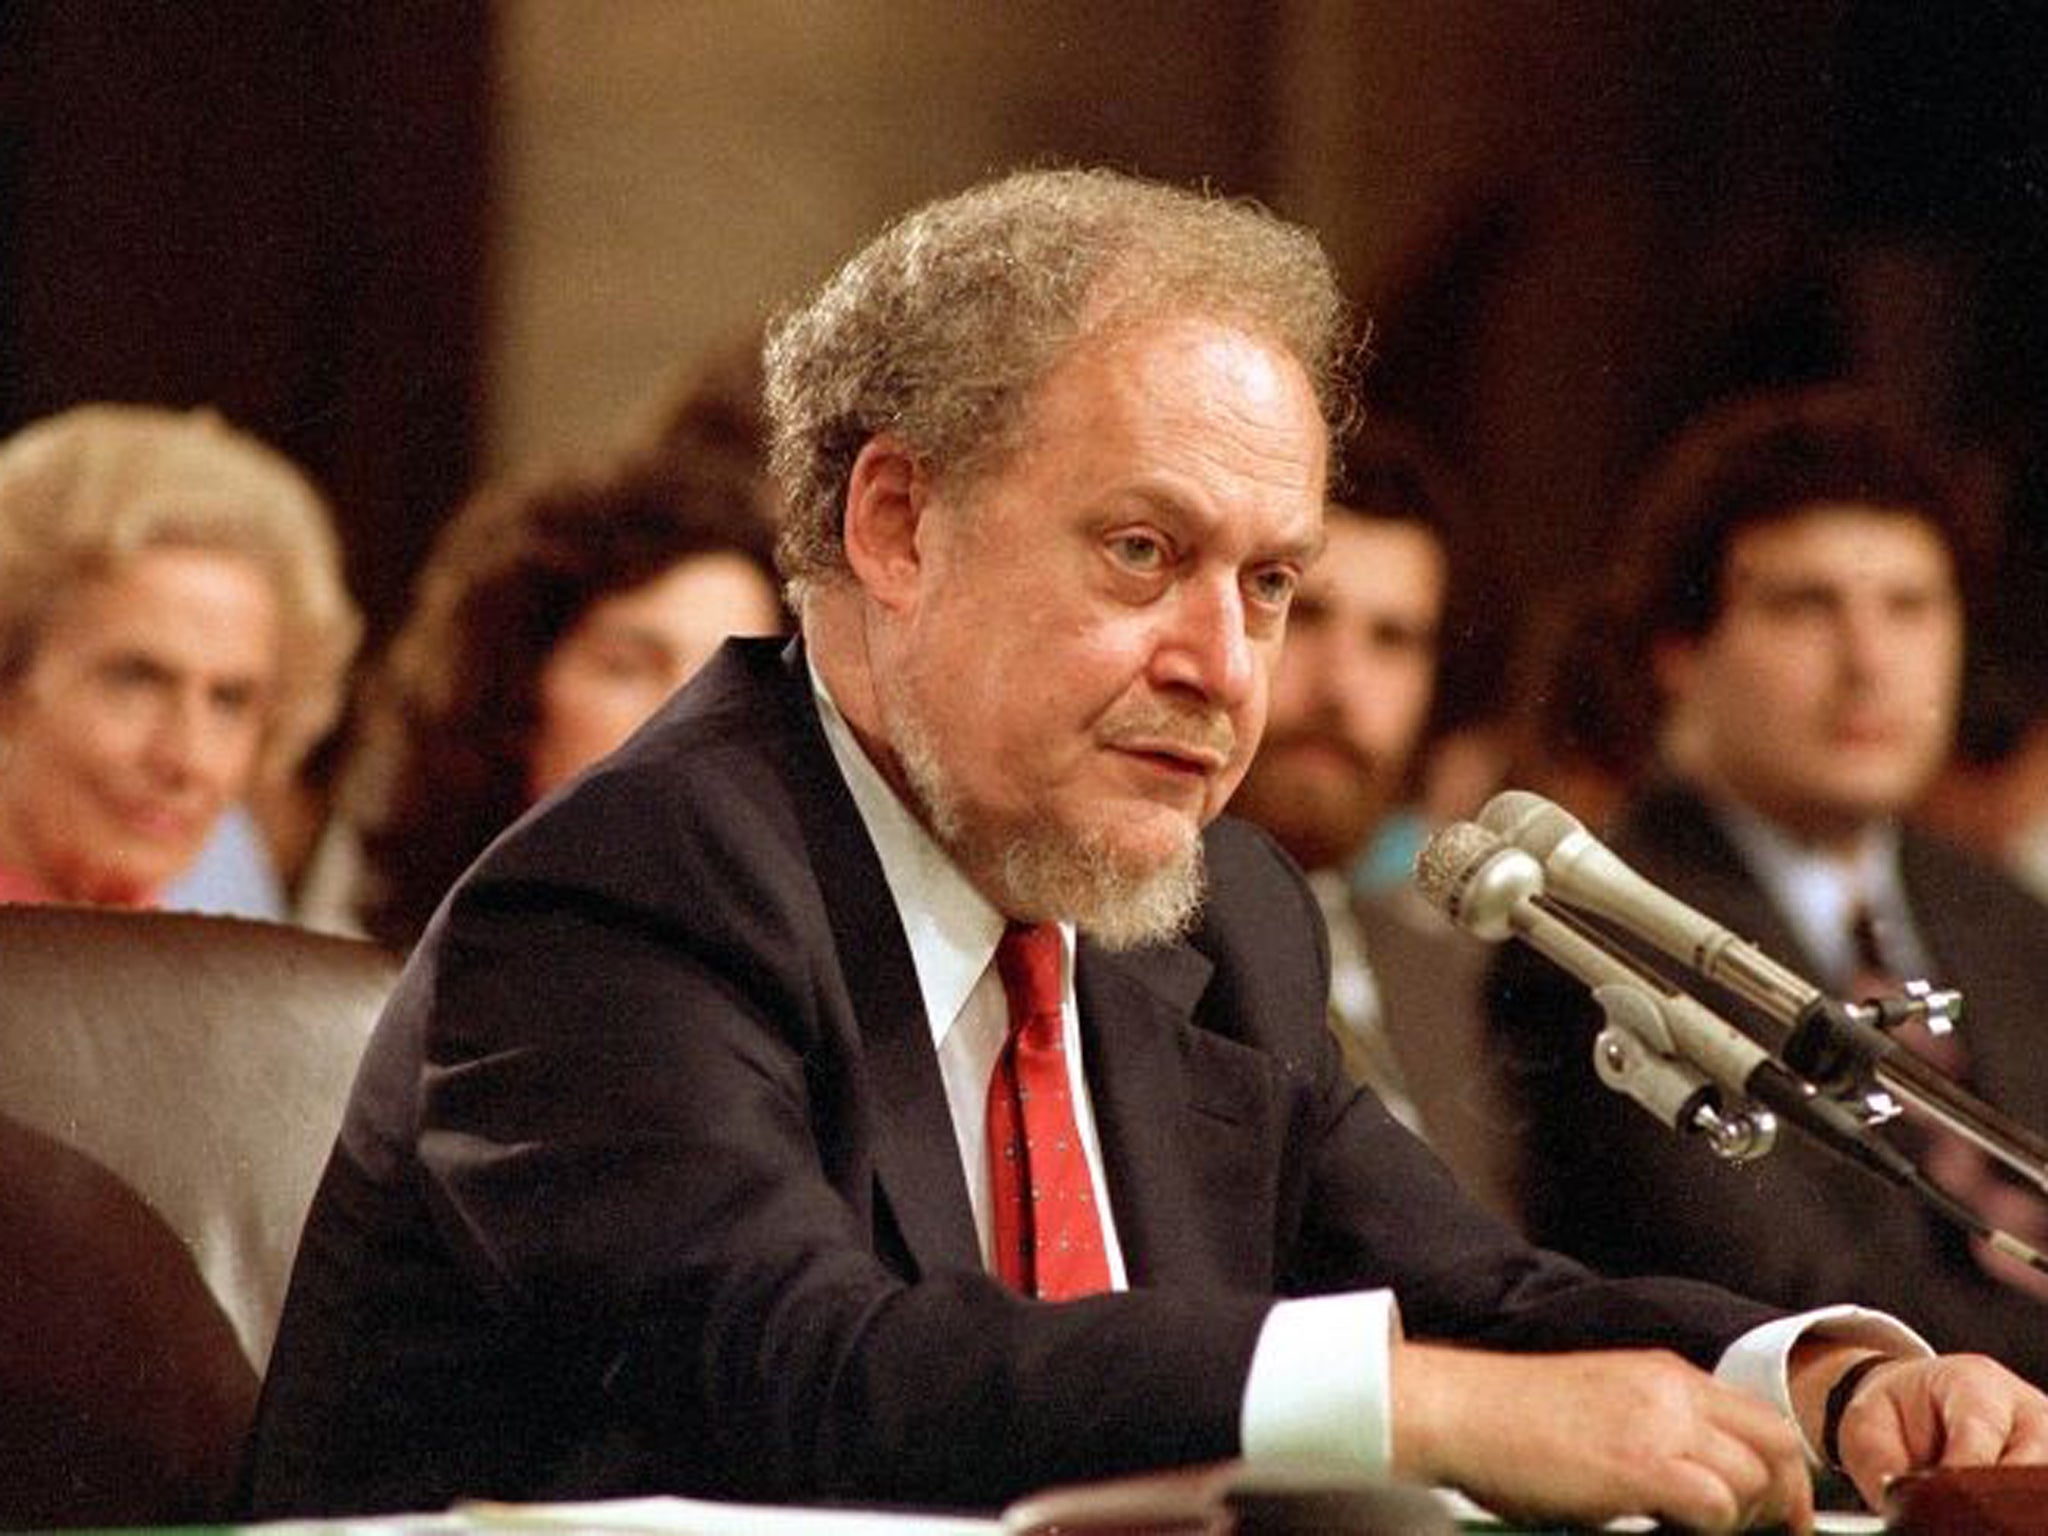 Robert Bork: Jurist who was rejected for the Supreme Court | The ...